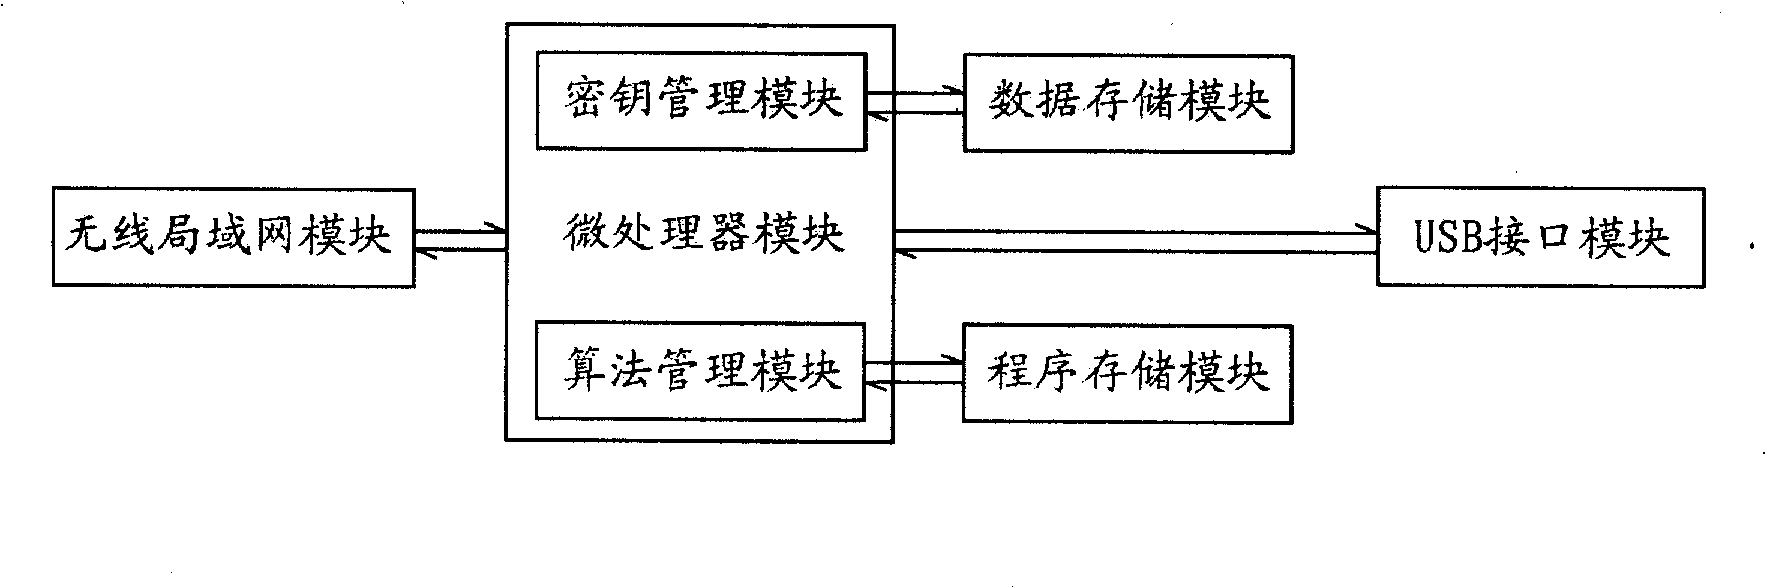 Method for implementing secret communication between communication terminal and wireless access point